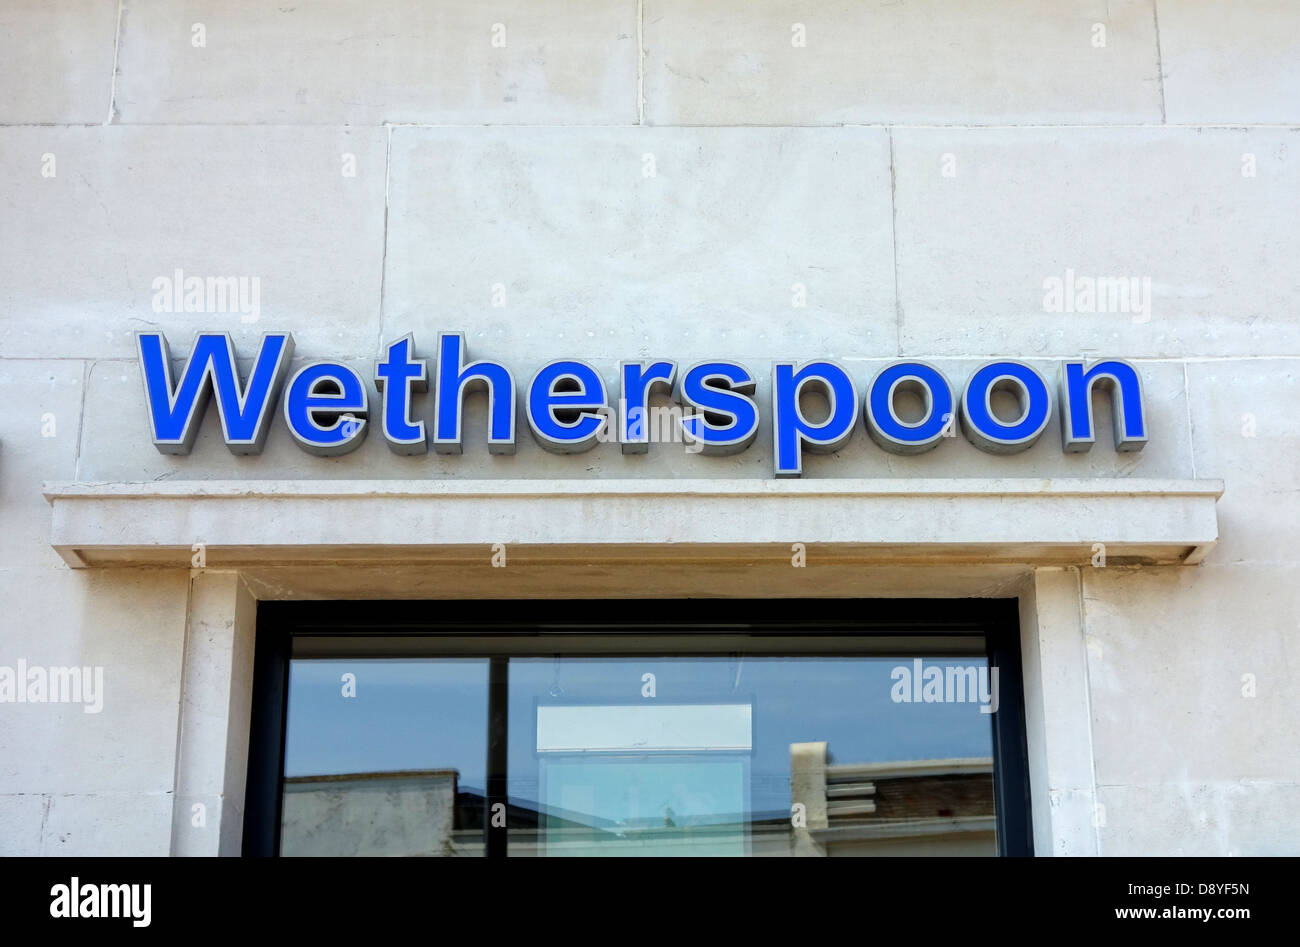 Wetherspoon sign over the door of a Wetherspoons establishment Stock Photo